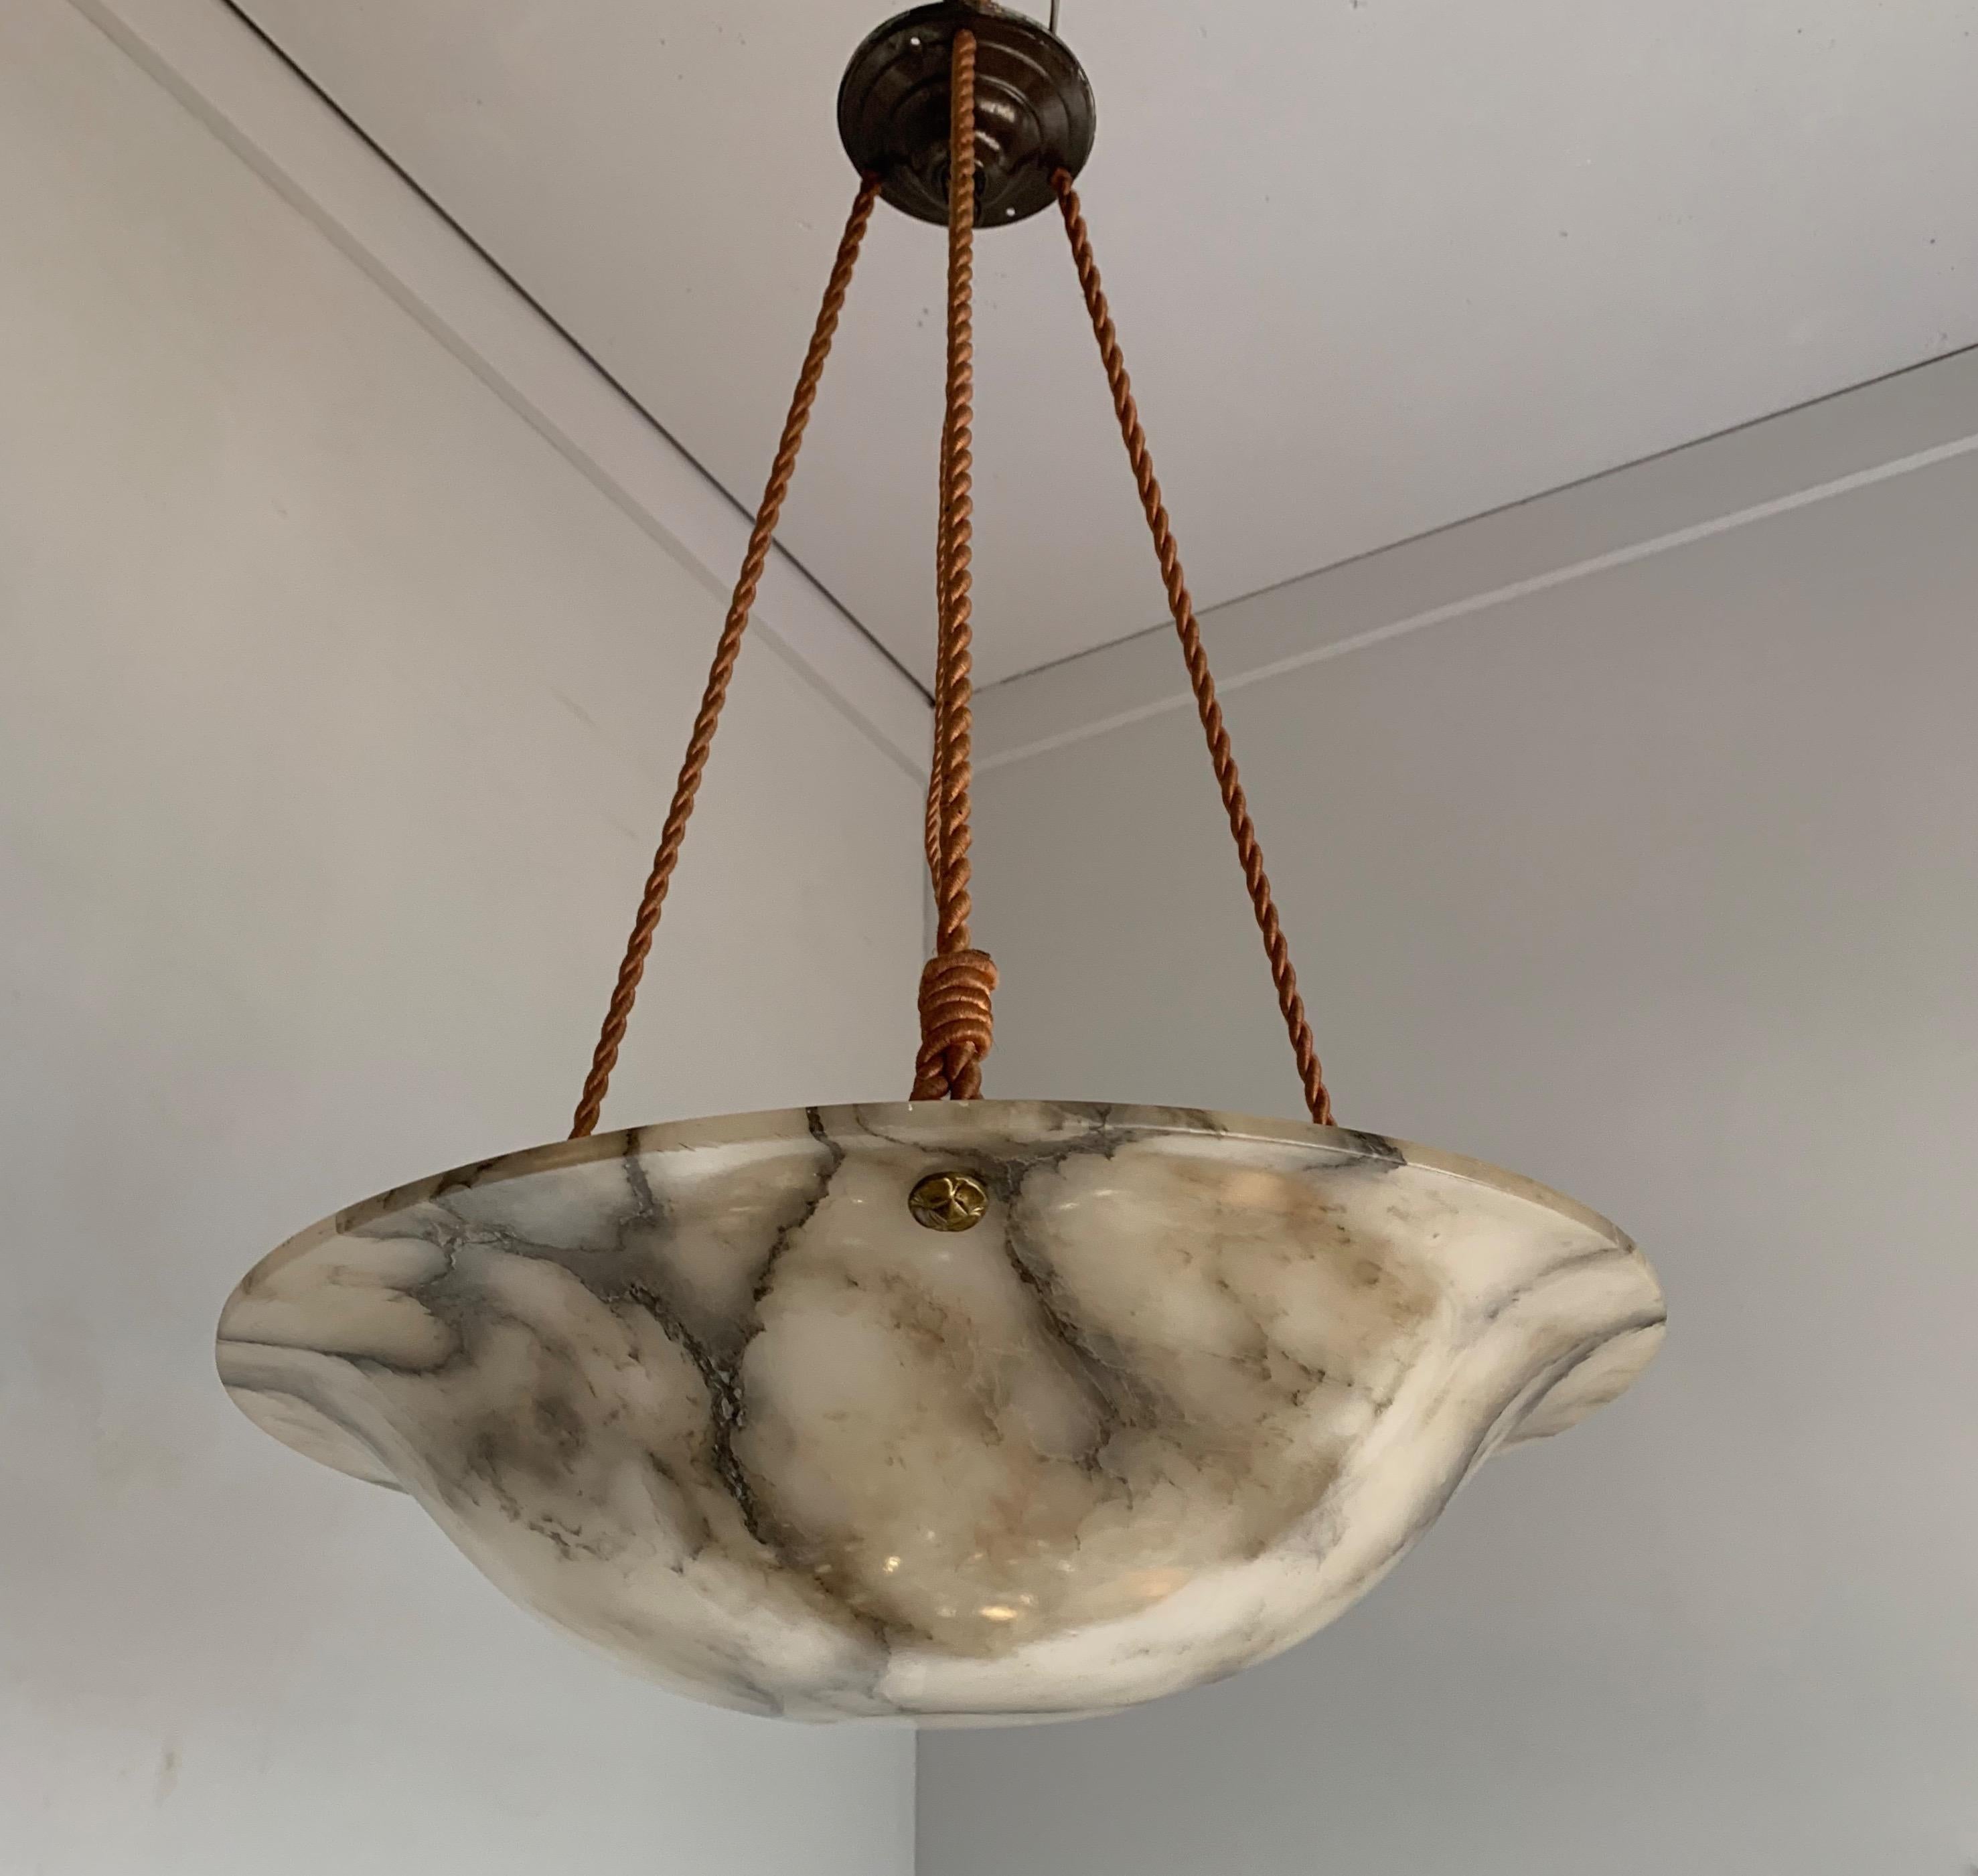 Another amazing and impressive 1920s pendant.

This early 20th century, large alabaster pendant comes with a stylish rope and canopy, which also makes it possible for us to (free of charge) change the height to one that is perfect for you. The shape